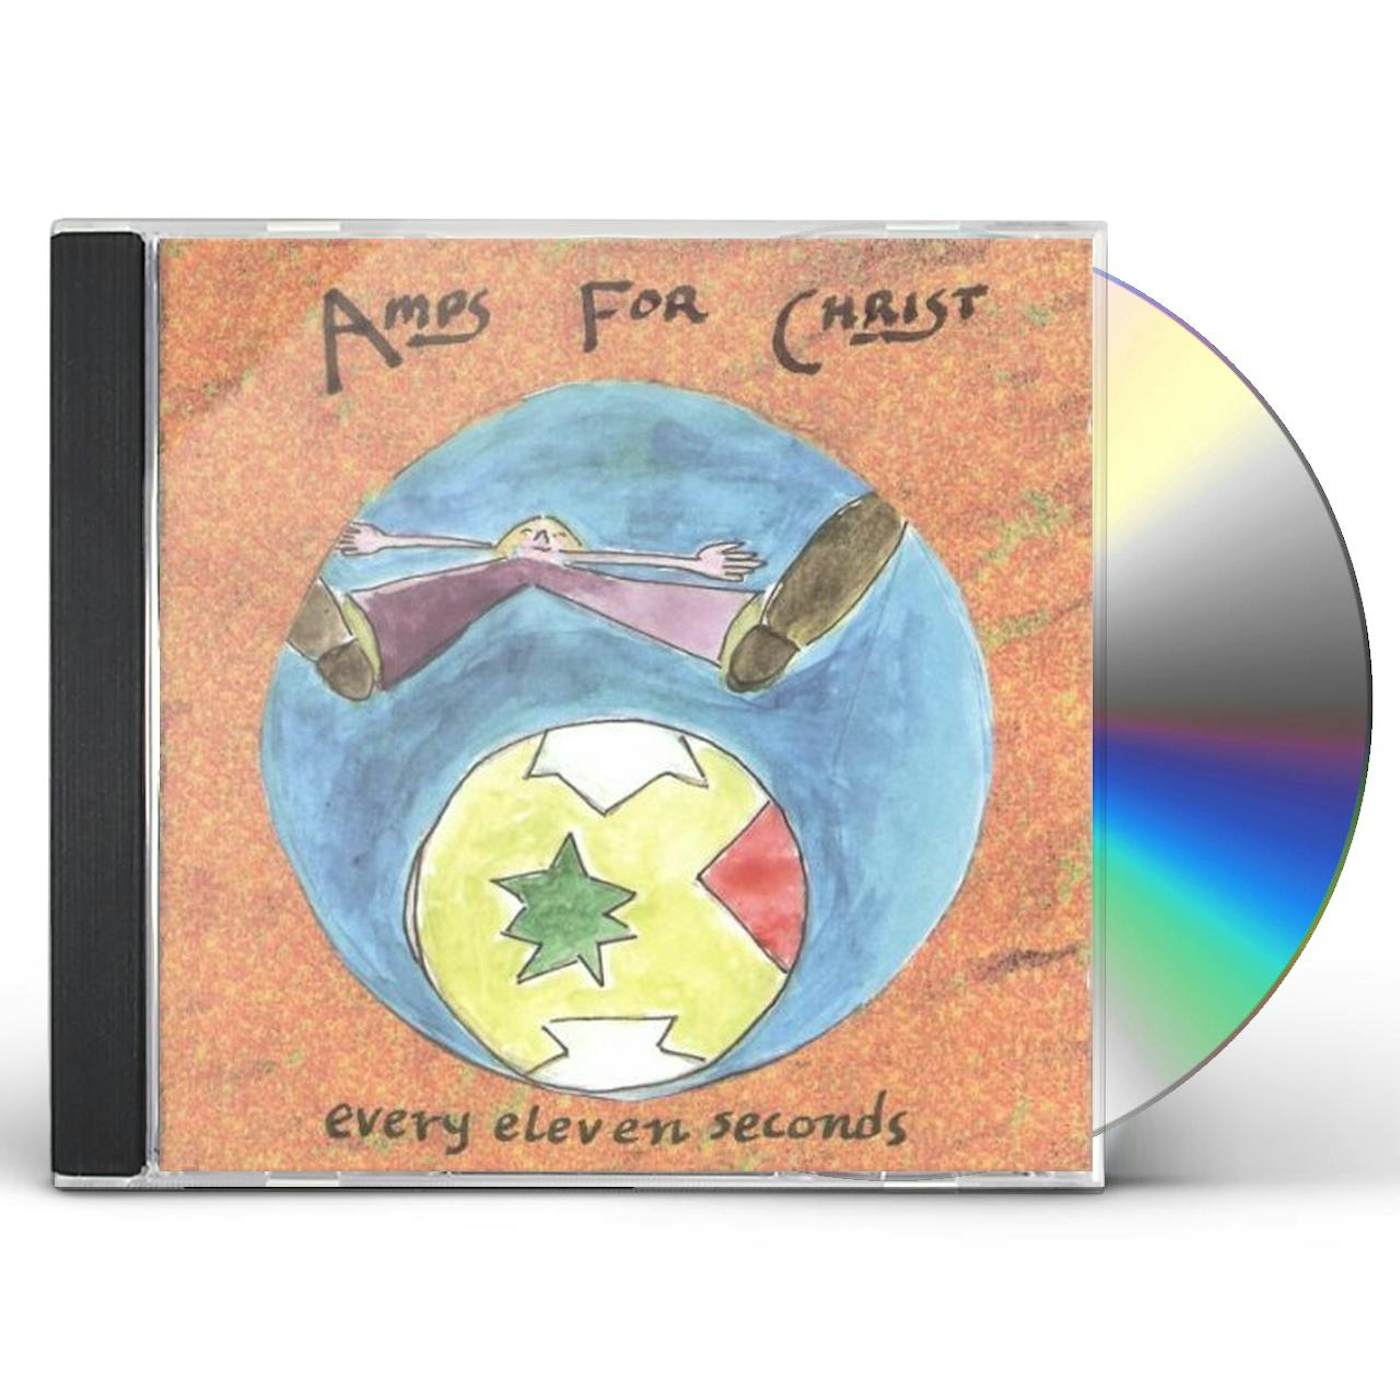 Amps For Christ EVERY ELEVEN SECONDS CD